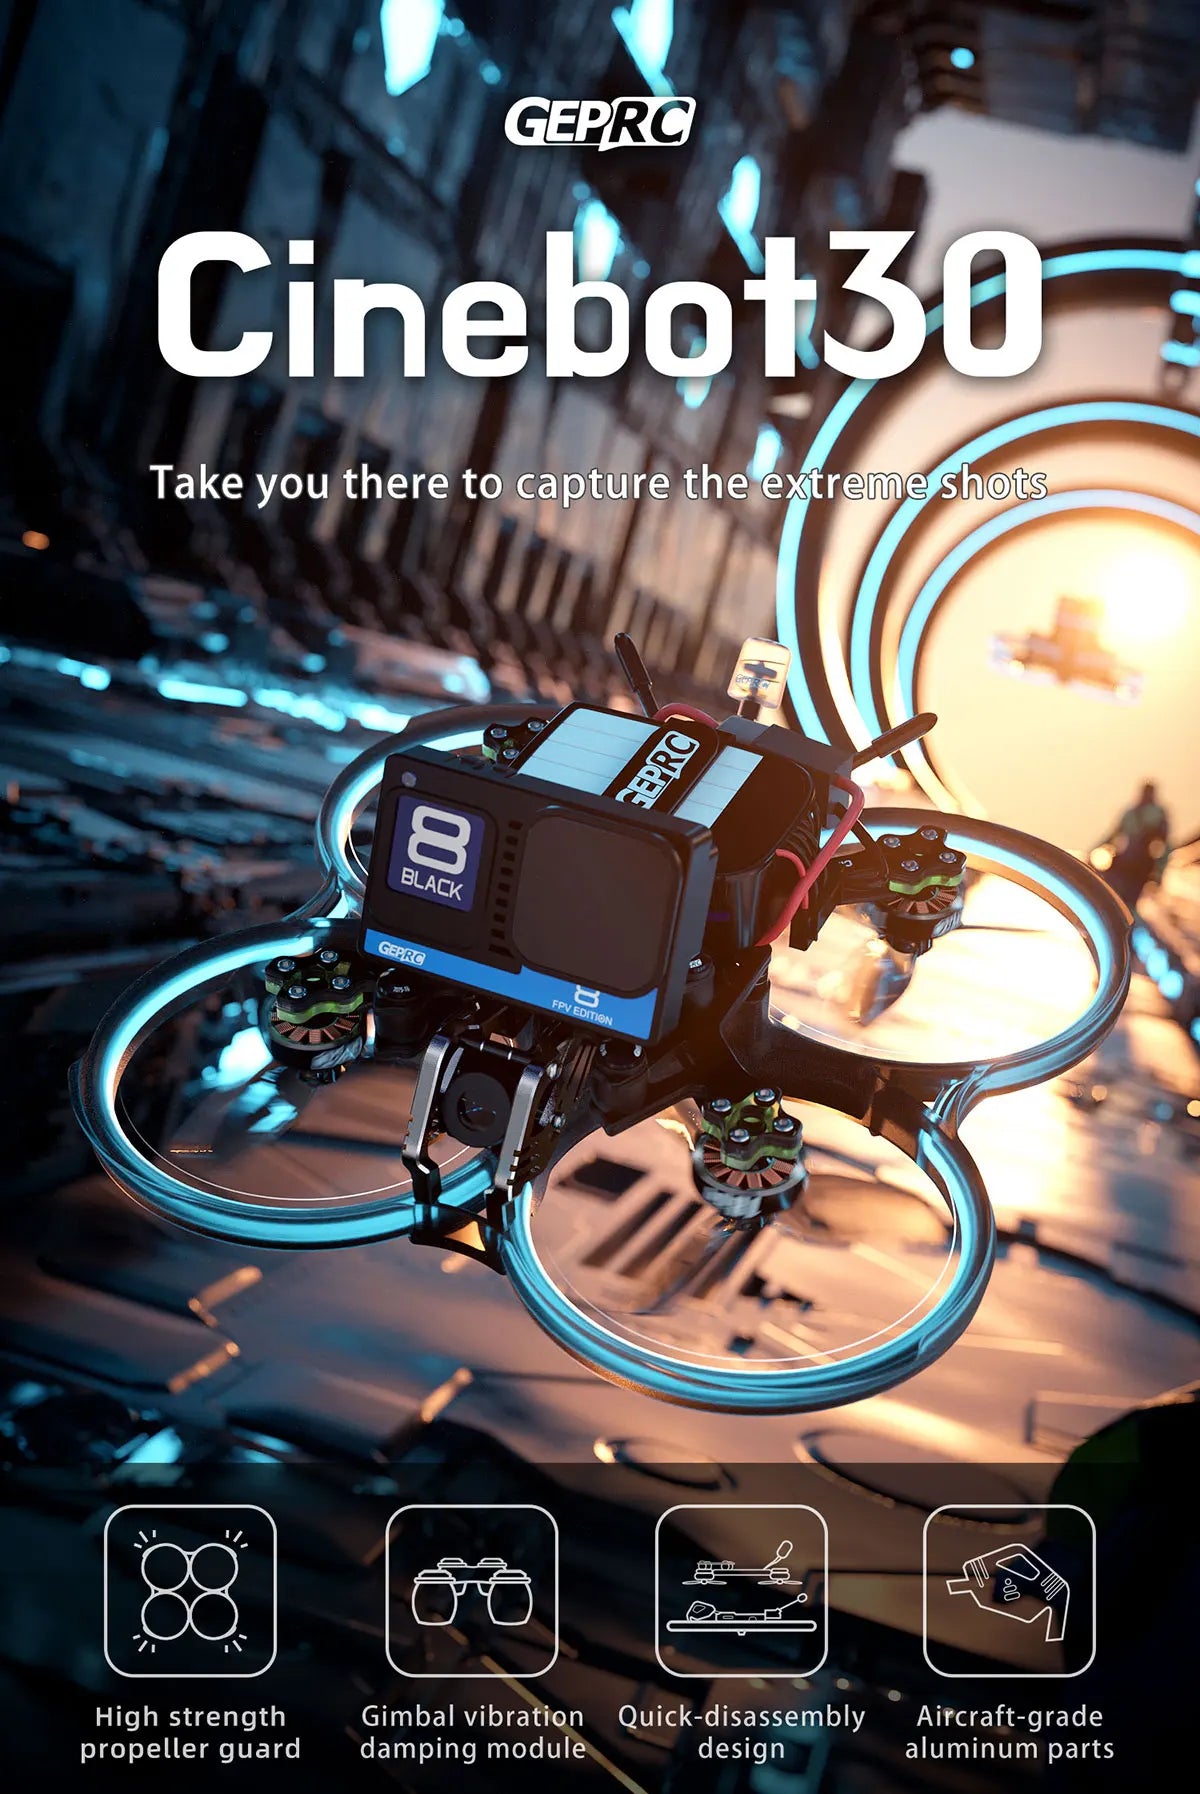 GEPRC Cinebot 30 FPV Drone, GEPRC Cinebot3o Take you there to capture the exitreme shots 8 